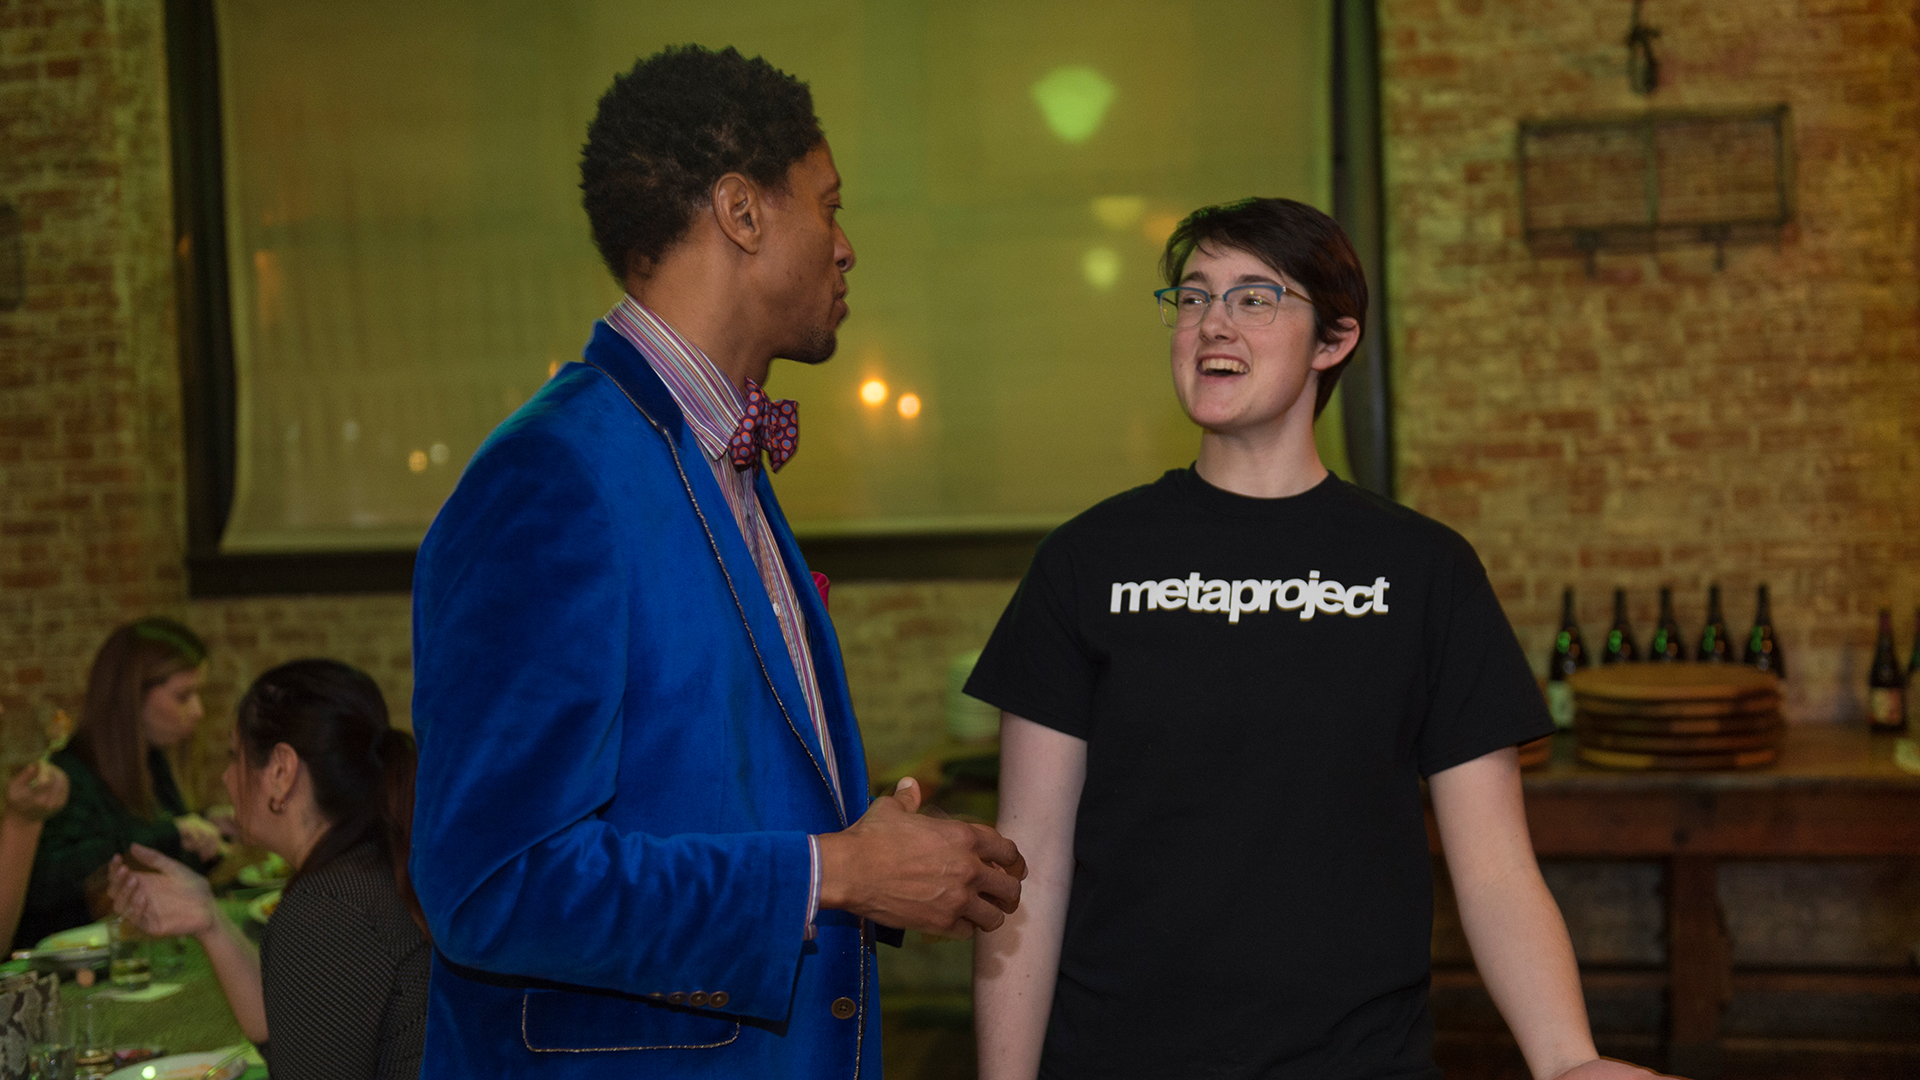 Student talking to guest at event